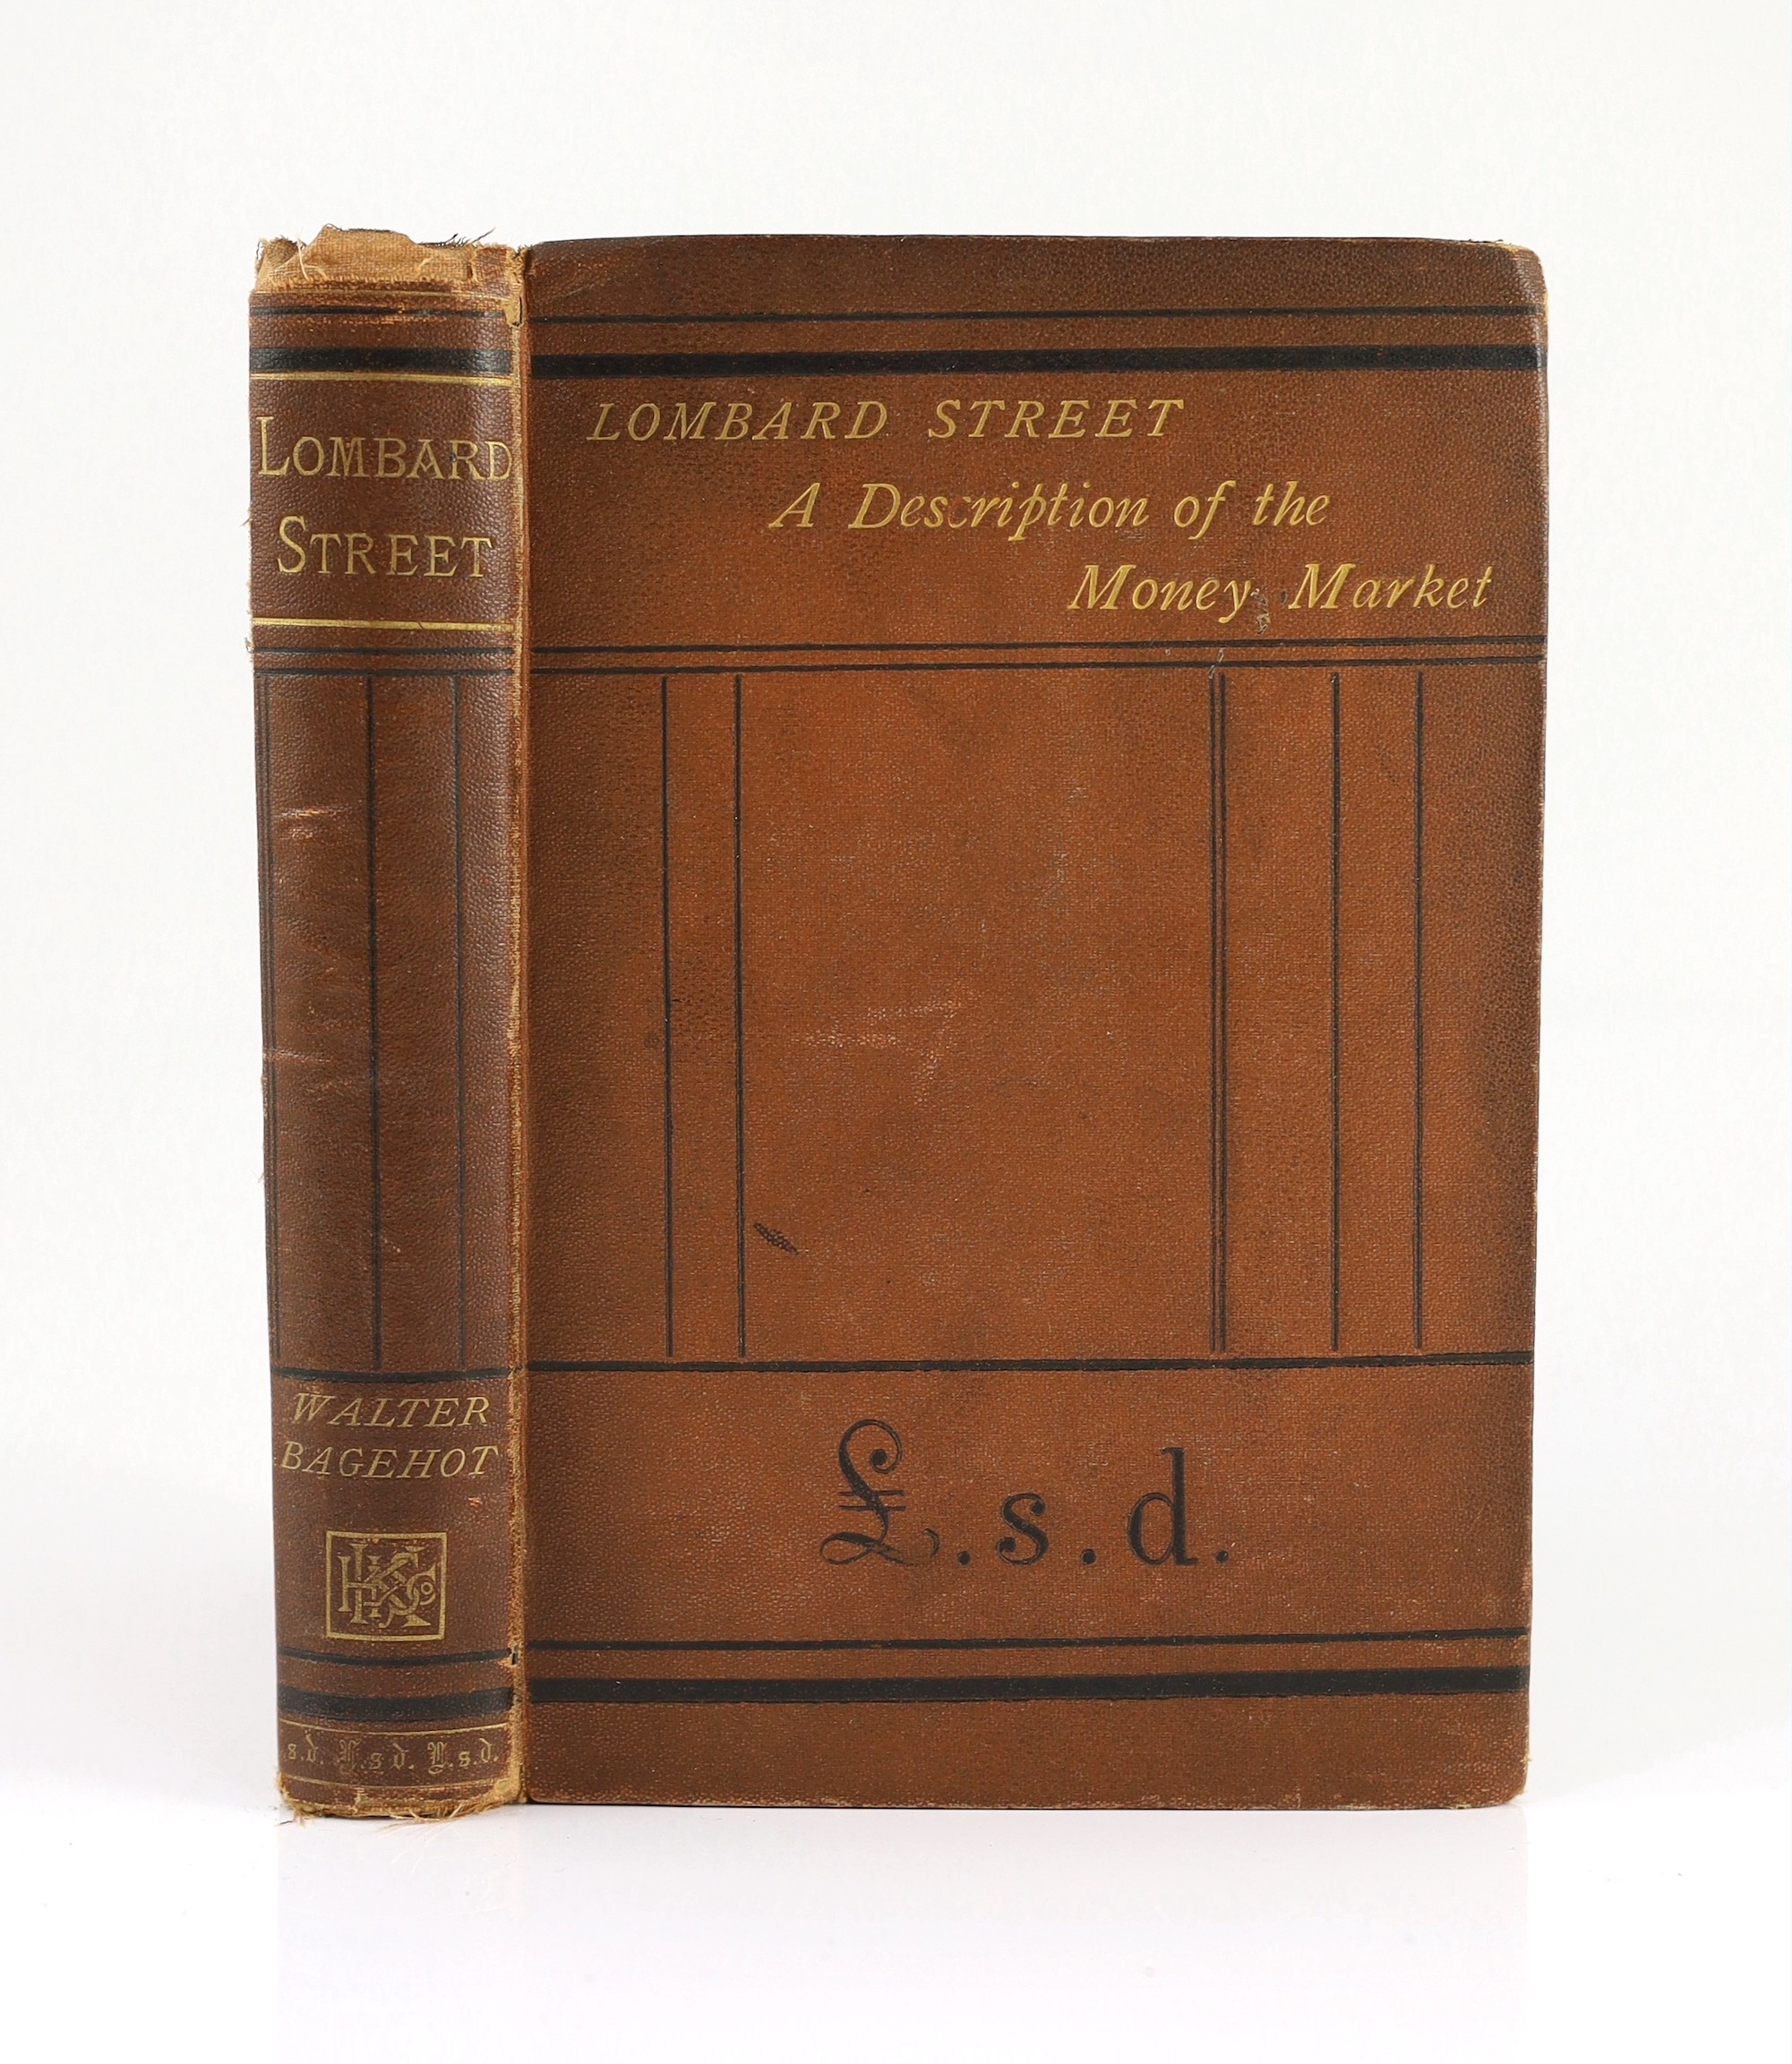 Bagehot, Walter - Lombard Street: a description of the money market. First edition. half title, publisher's 32pp. catalogue (1893) and printer's advert leaf; original gilt-lettered cloth, cr.8vo. Henry S. King, 1873